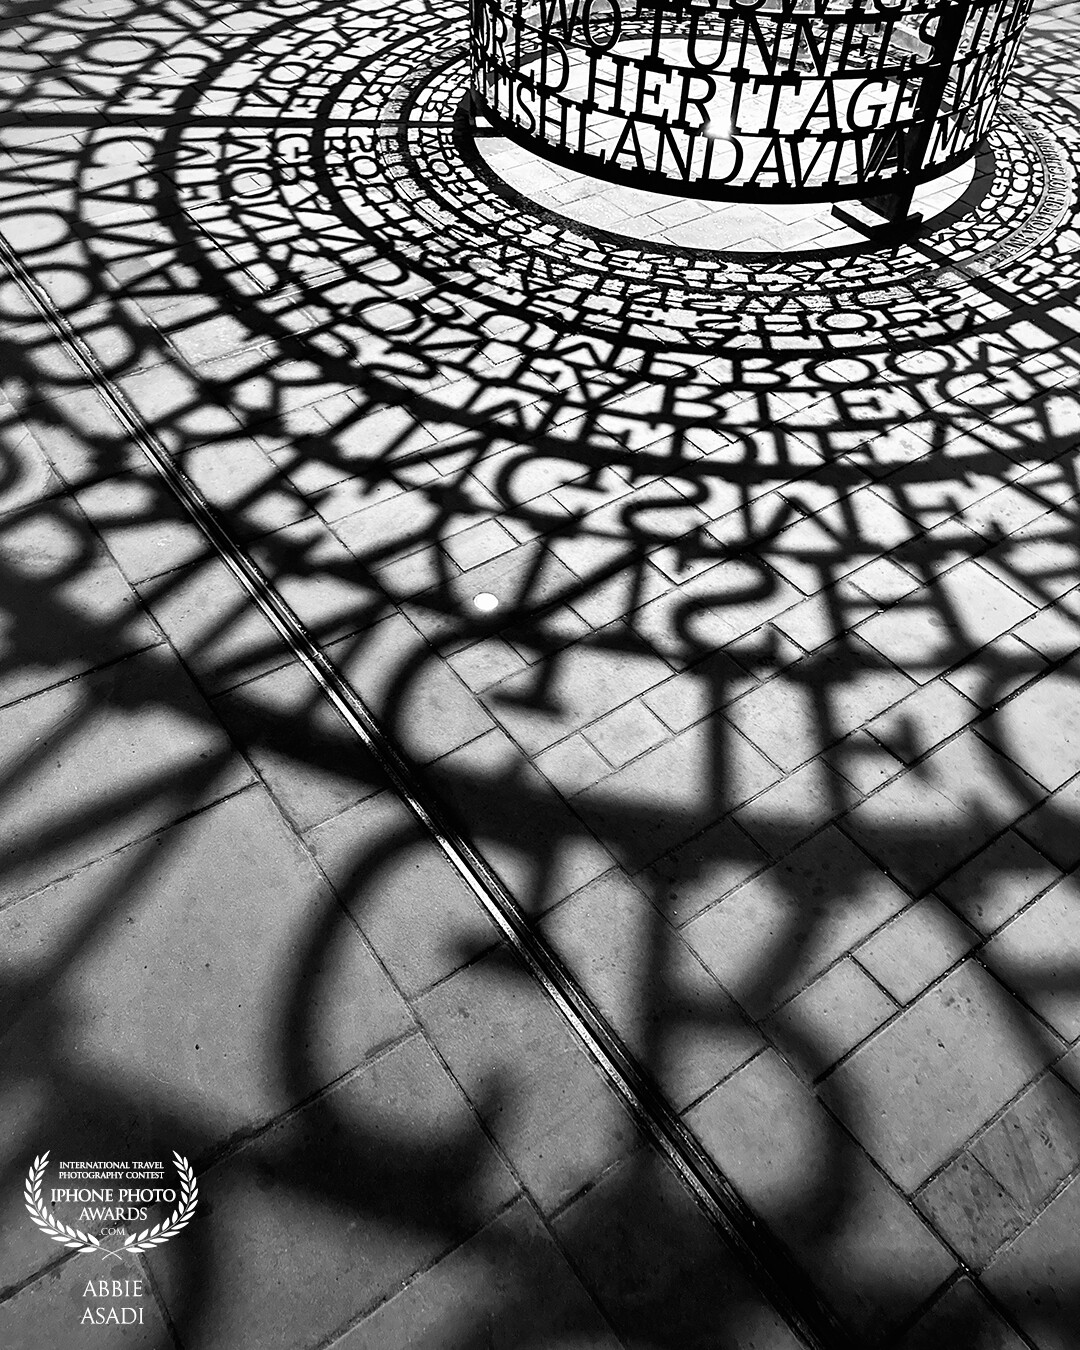 An art installation in Bath, UK representing different towns in the area. Walking by I couldn’t resist the shadows it was creating.